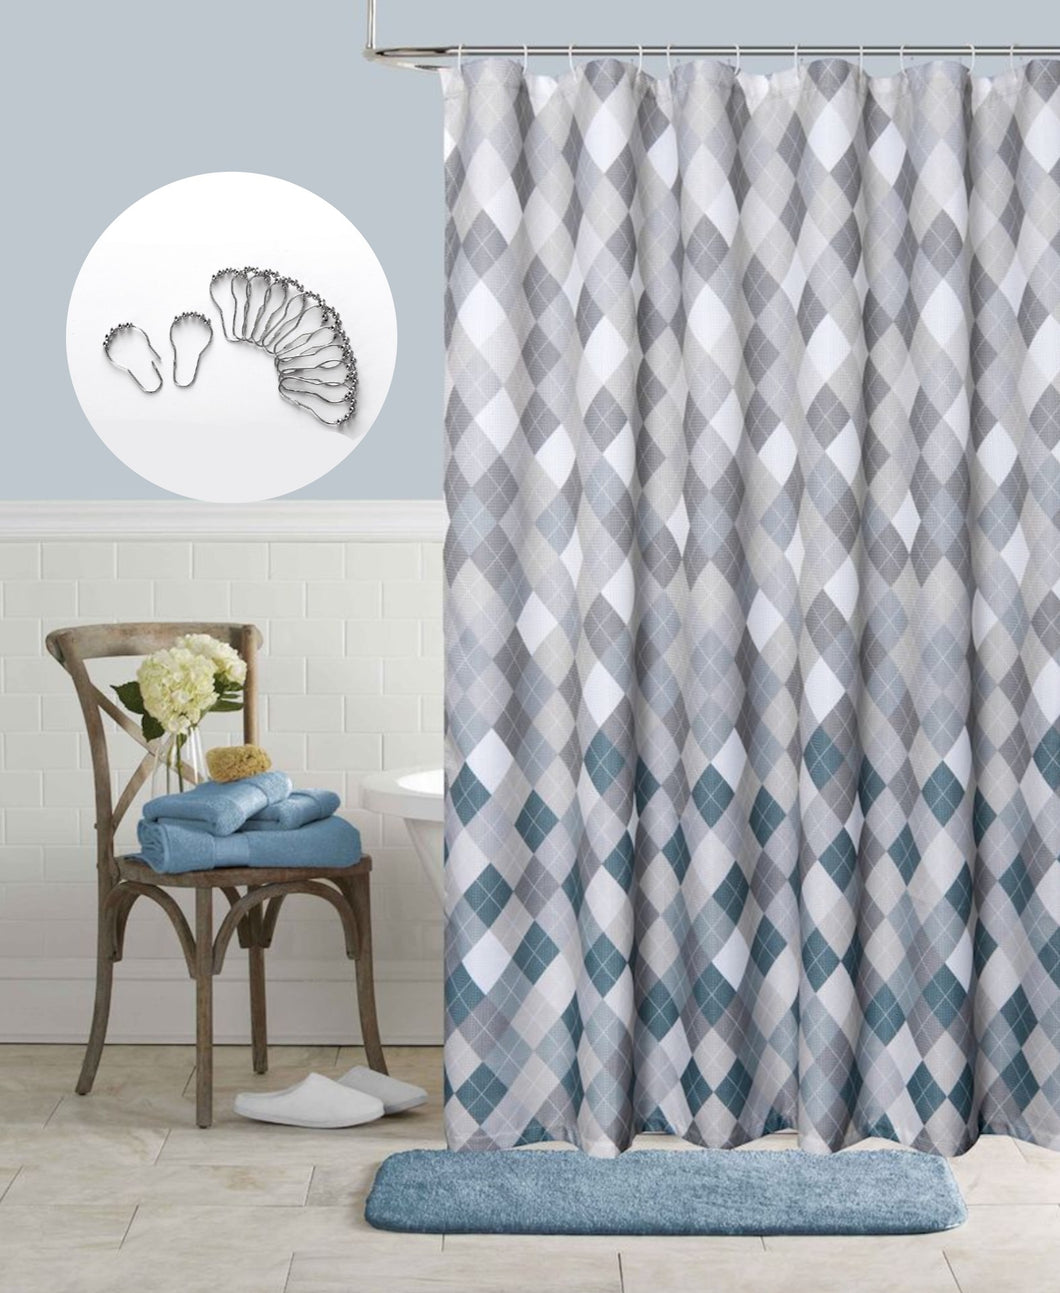 Dainty Home 13 Piece Mosaic Printed Waffle Weave Textured Shower Curtain And 12 Metal Rollerball Hooks